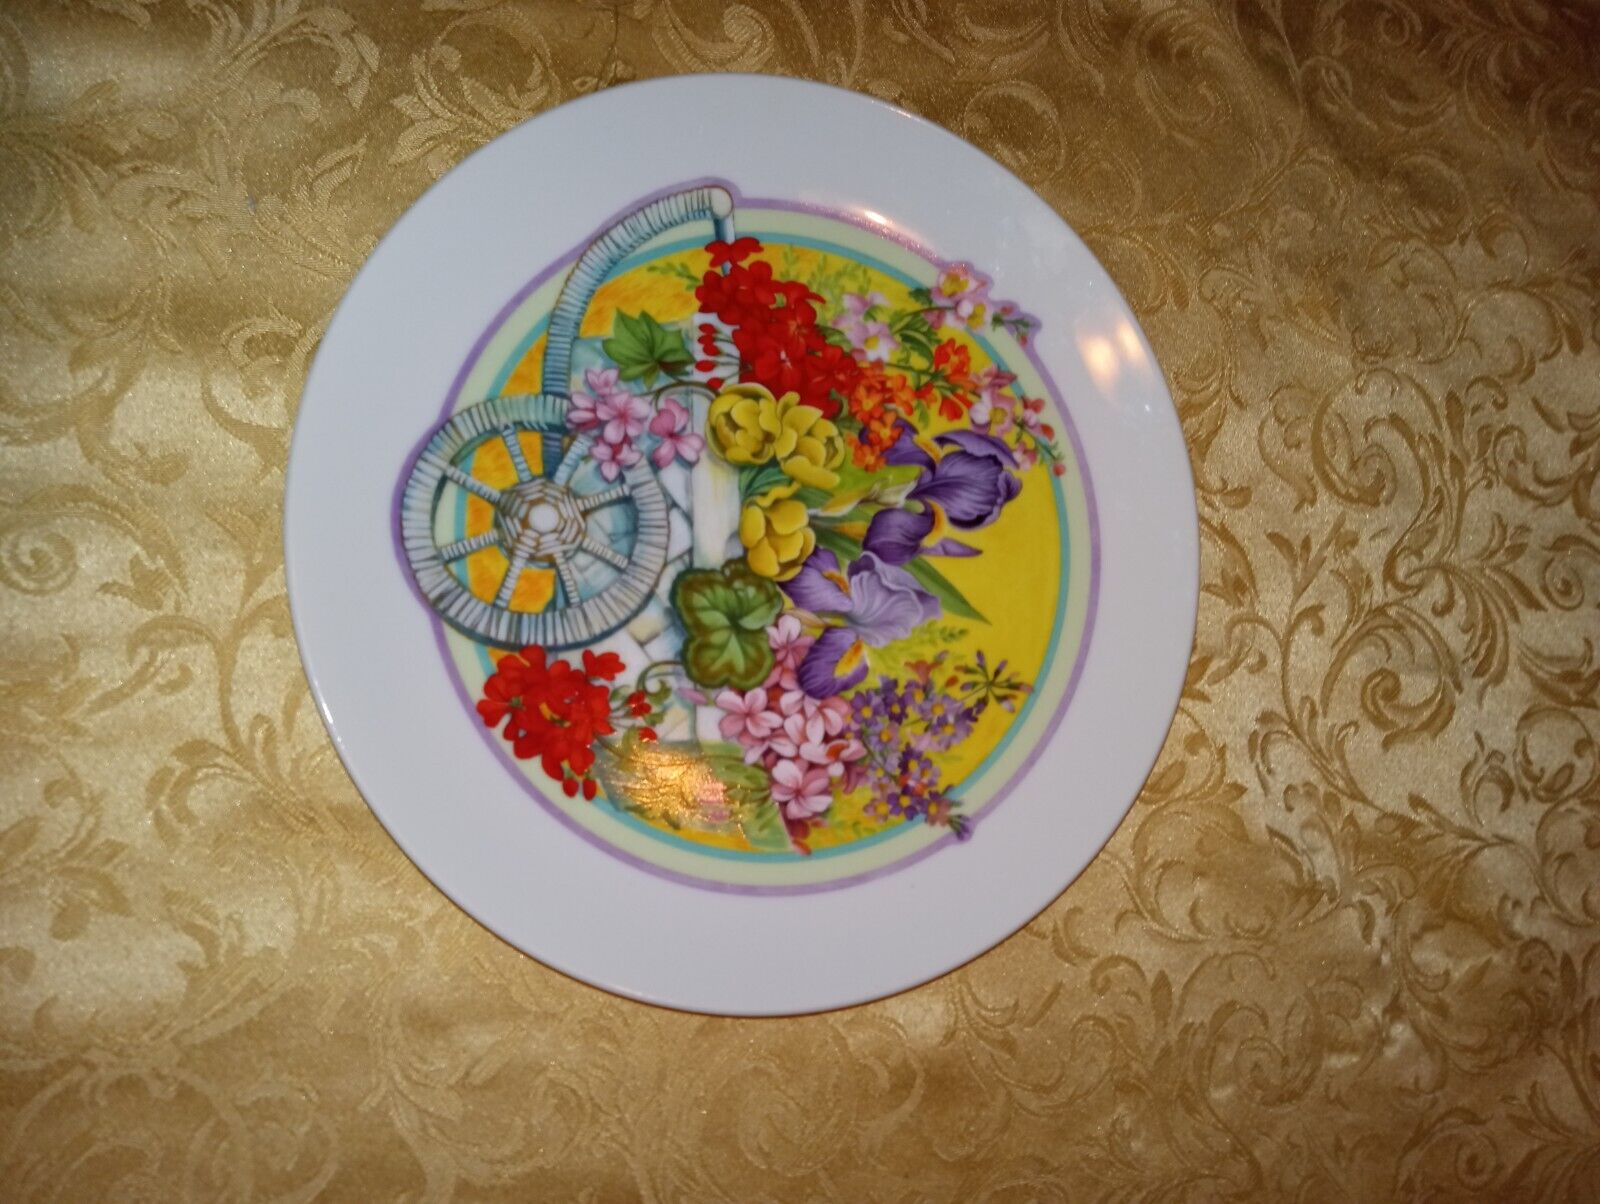 Country Essence 1987 Enesco Imports Corp. By Betty Chaisson Plate